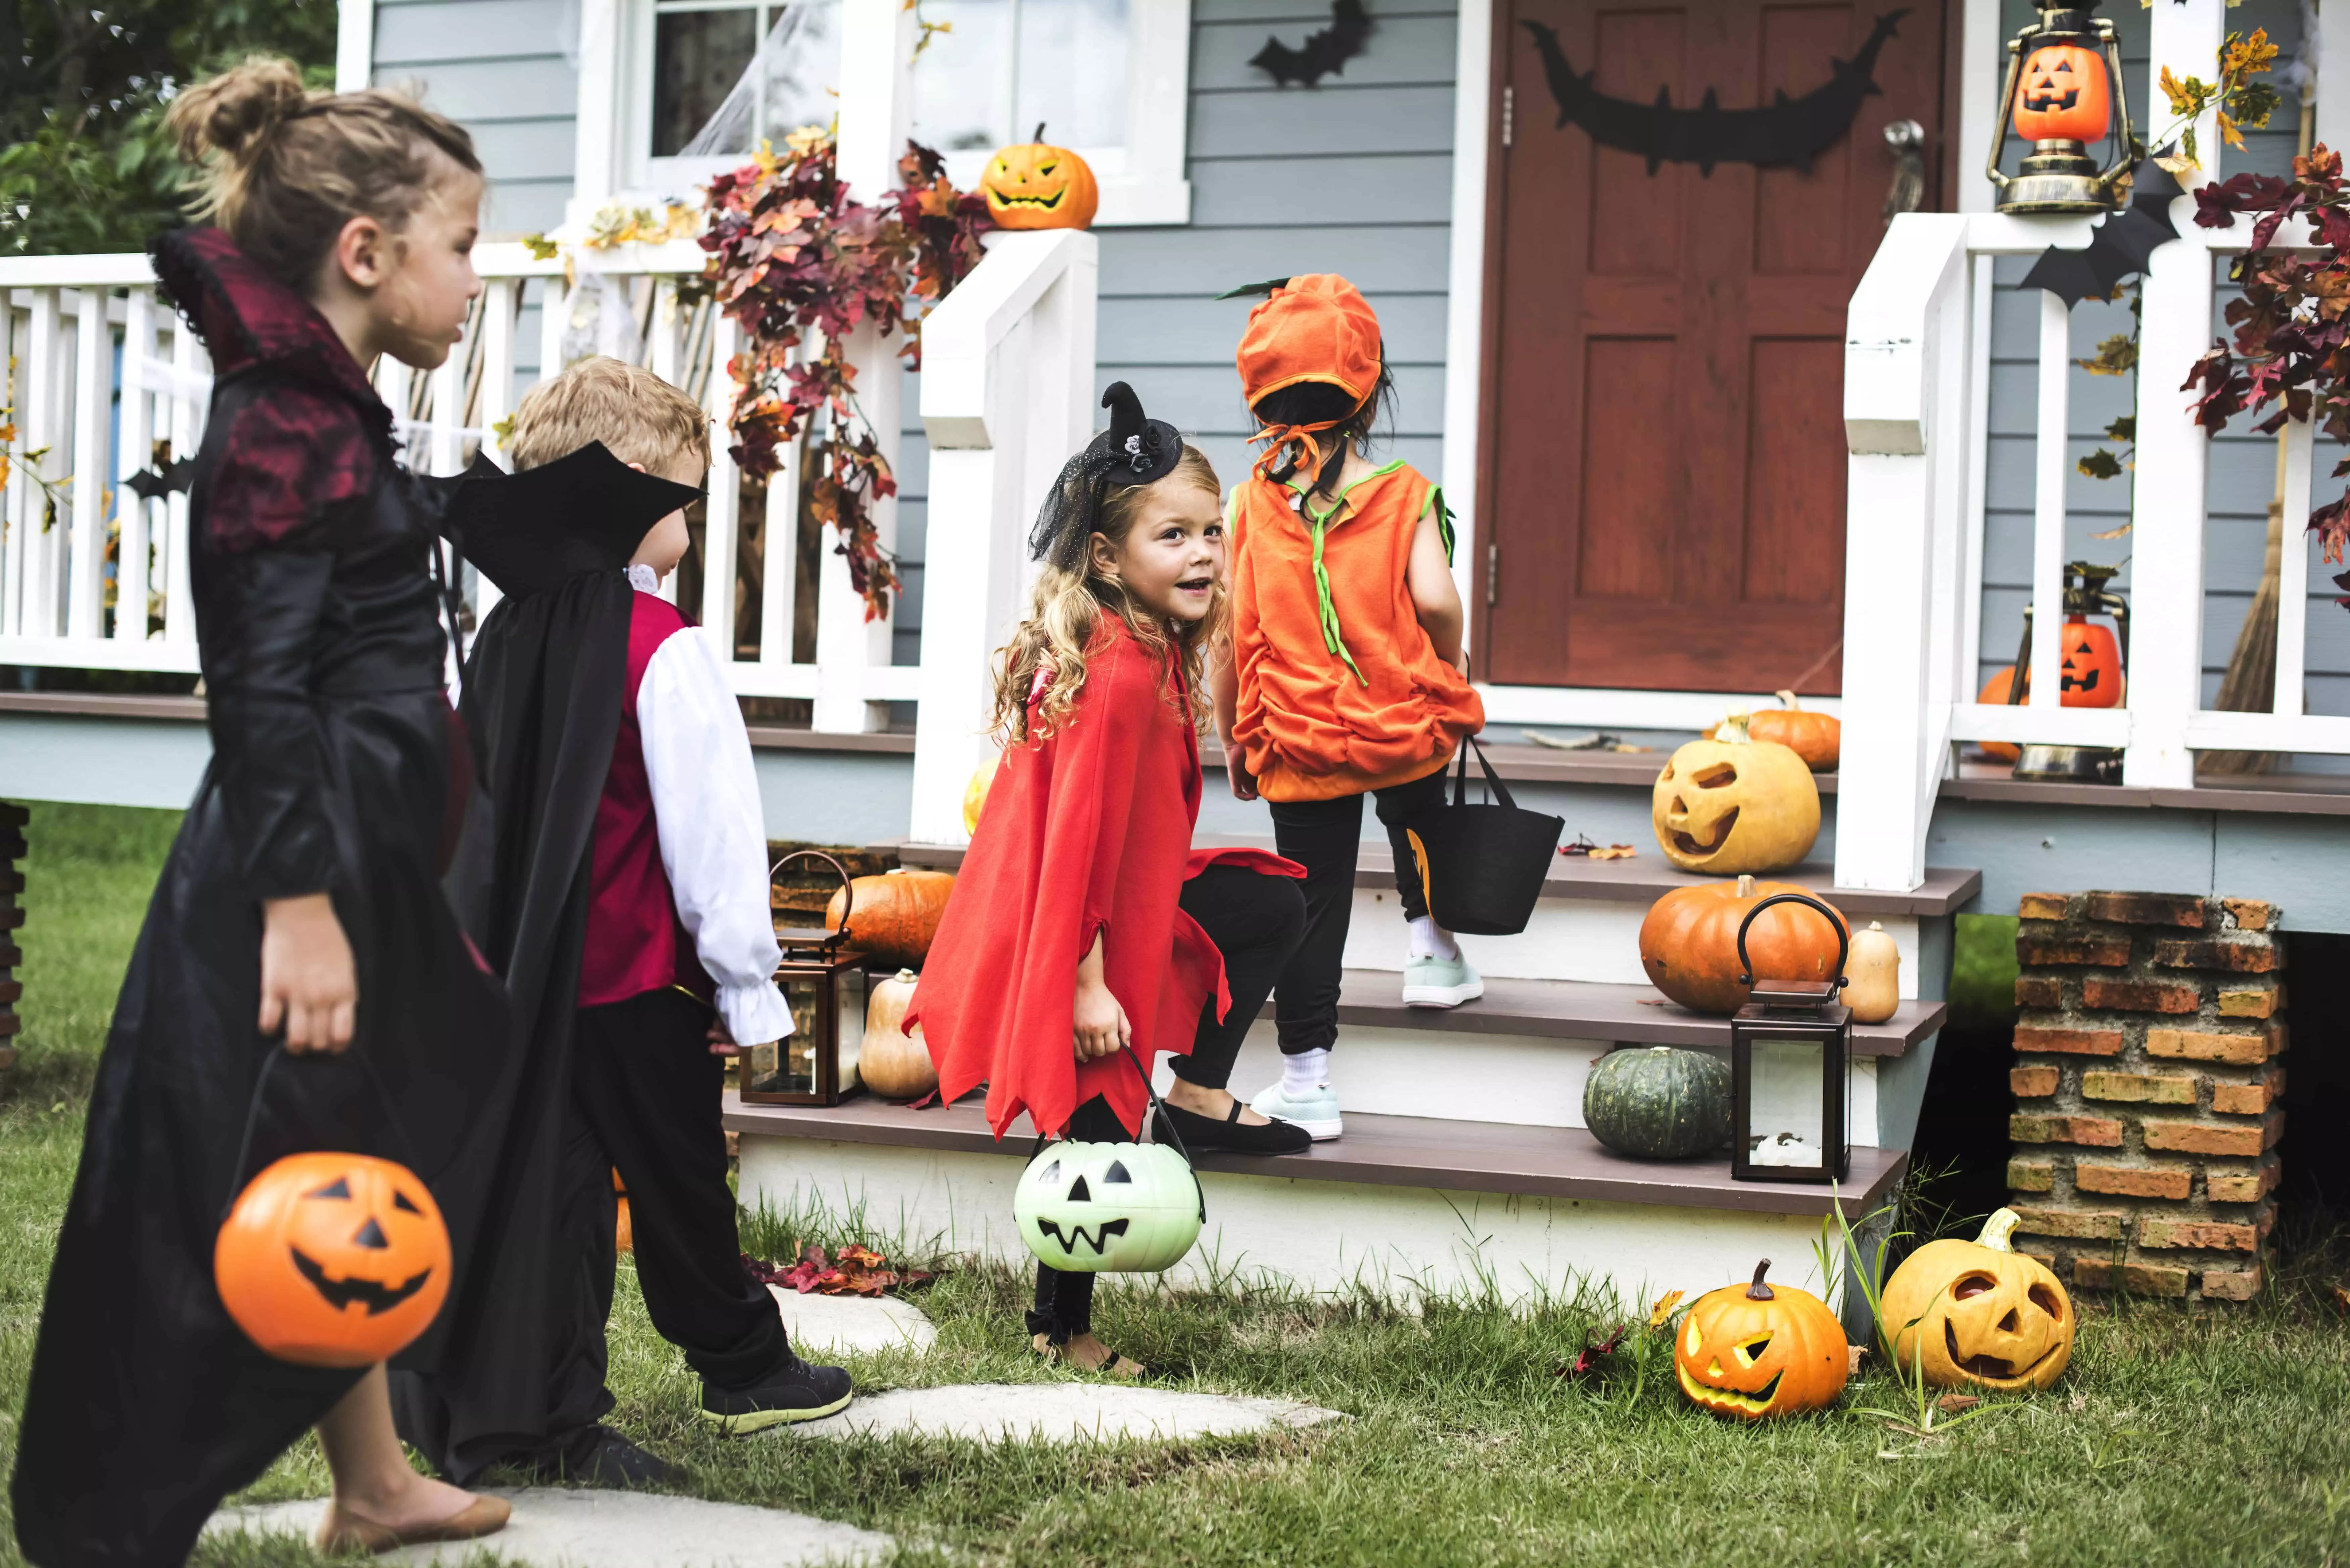 Keep Halloween fun by keeping your loved ones safe! Grab our best Halloween safety tips for parents and kids at Made in a Pinch. For more helpful tips and great recipes, follow us on Pinterest.